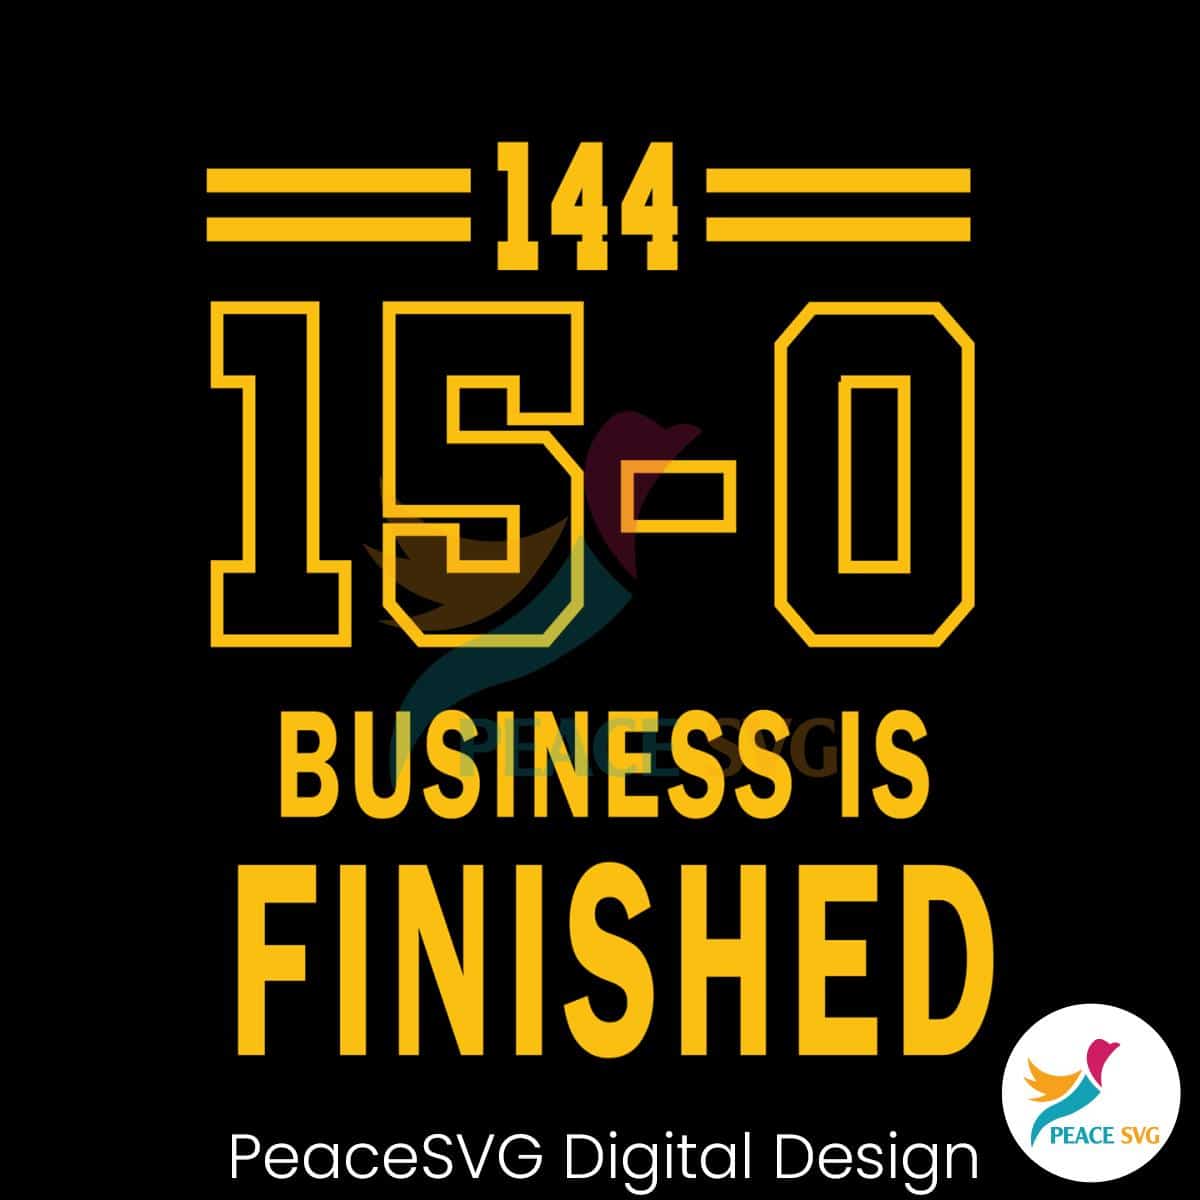 Business Is Finished Michigan 144 Team SVG